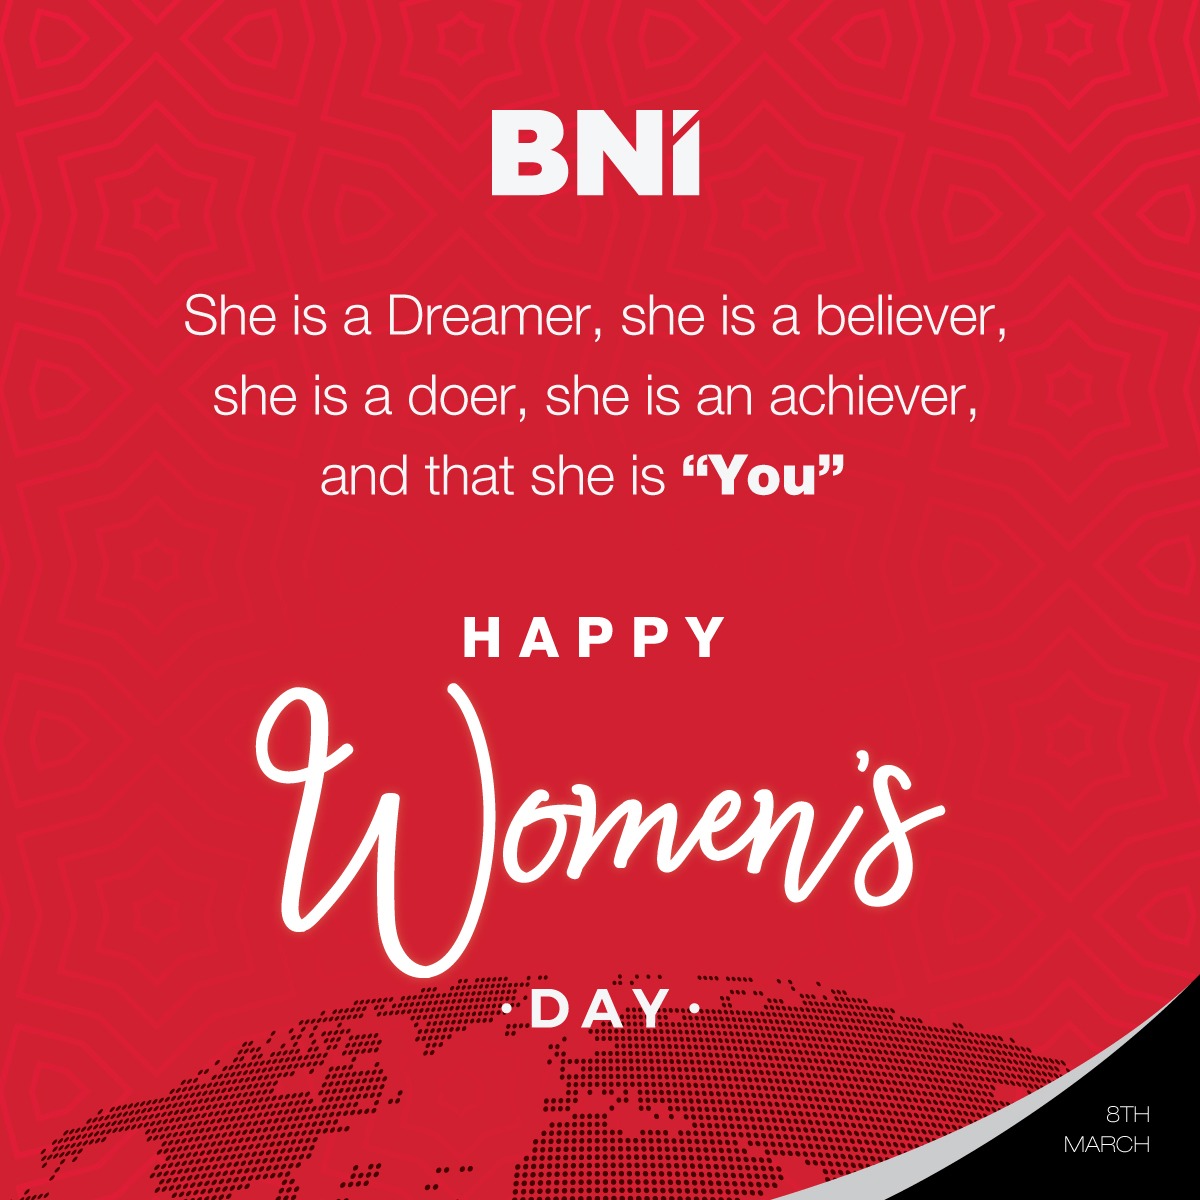 She is a Dreamer, she is a believer, she is a doer, she is an achiever, and that she is “You”. @DNKibuuka #bnireferralsatwork, #bnireferralsource, #bnireferralsinmotion